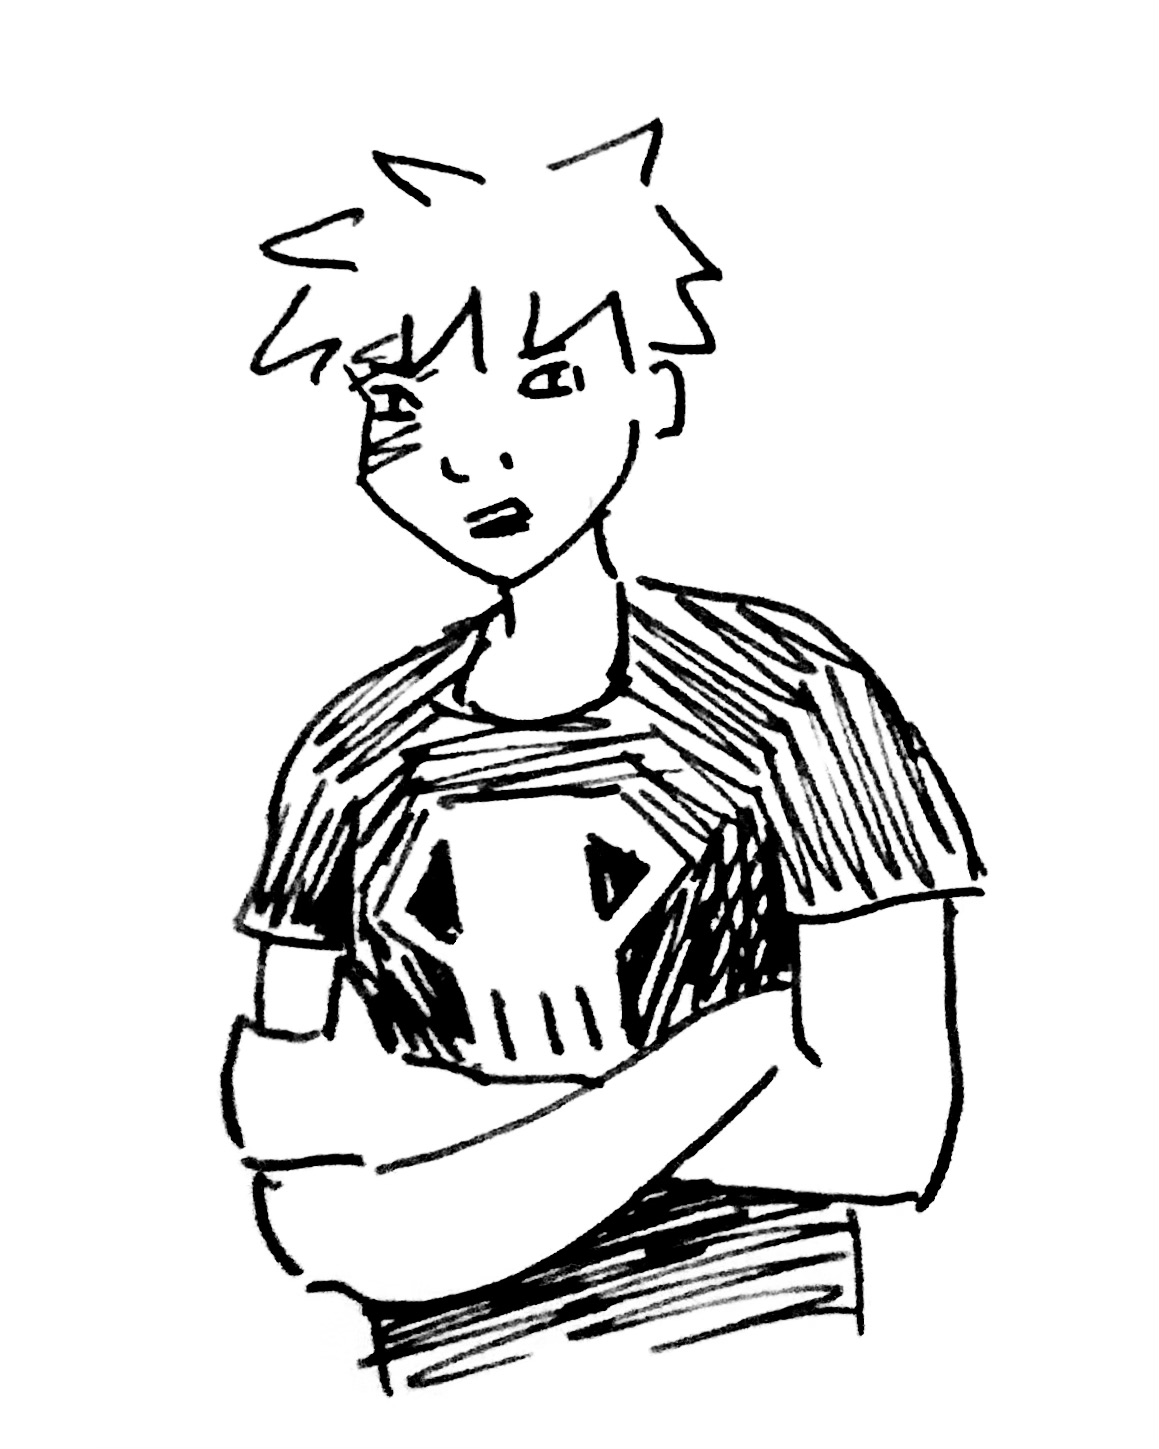 bakugou stands with his arms crossed